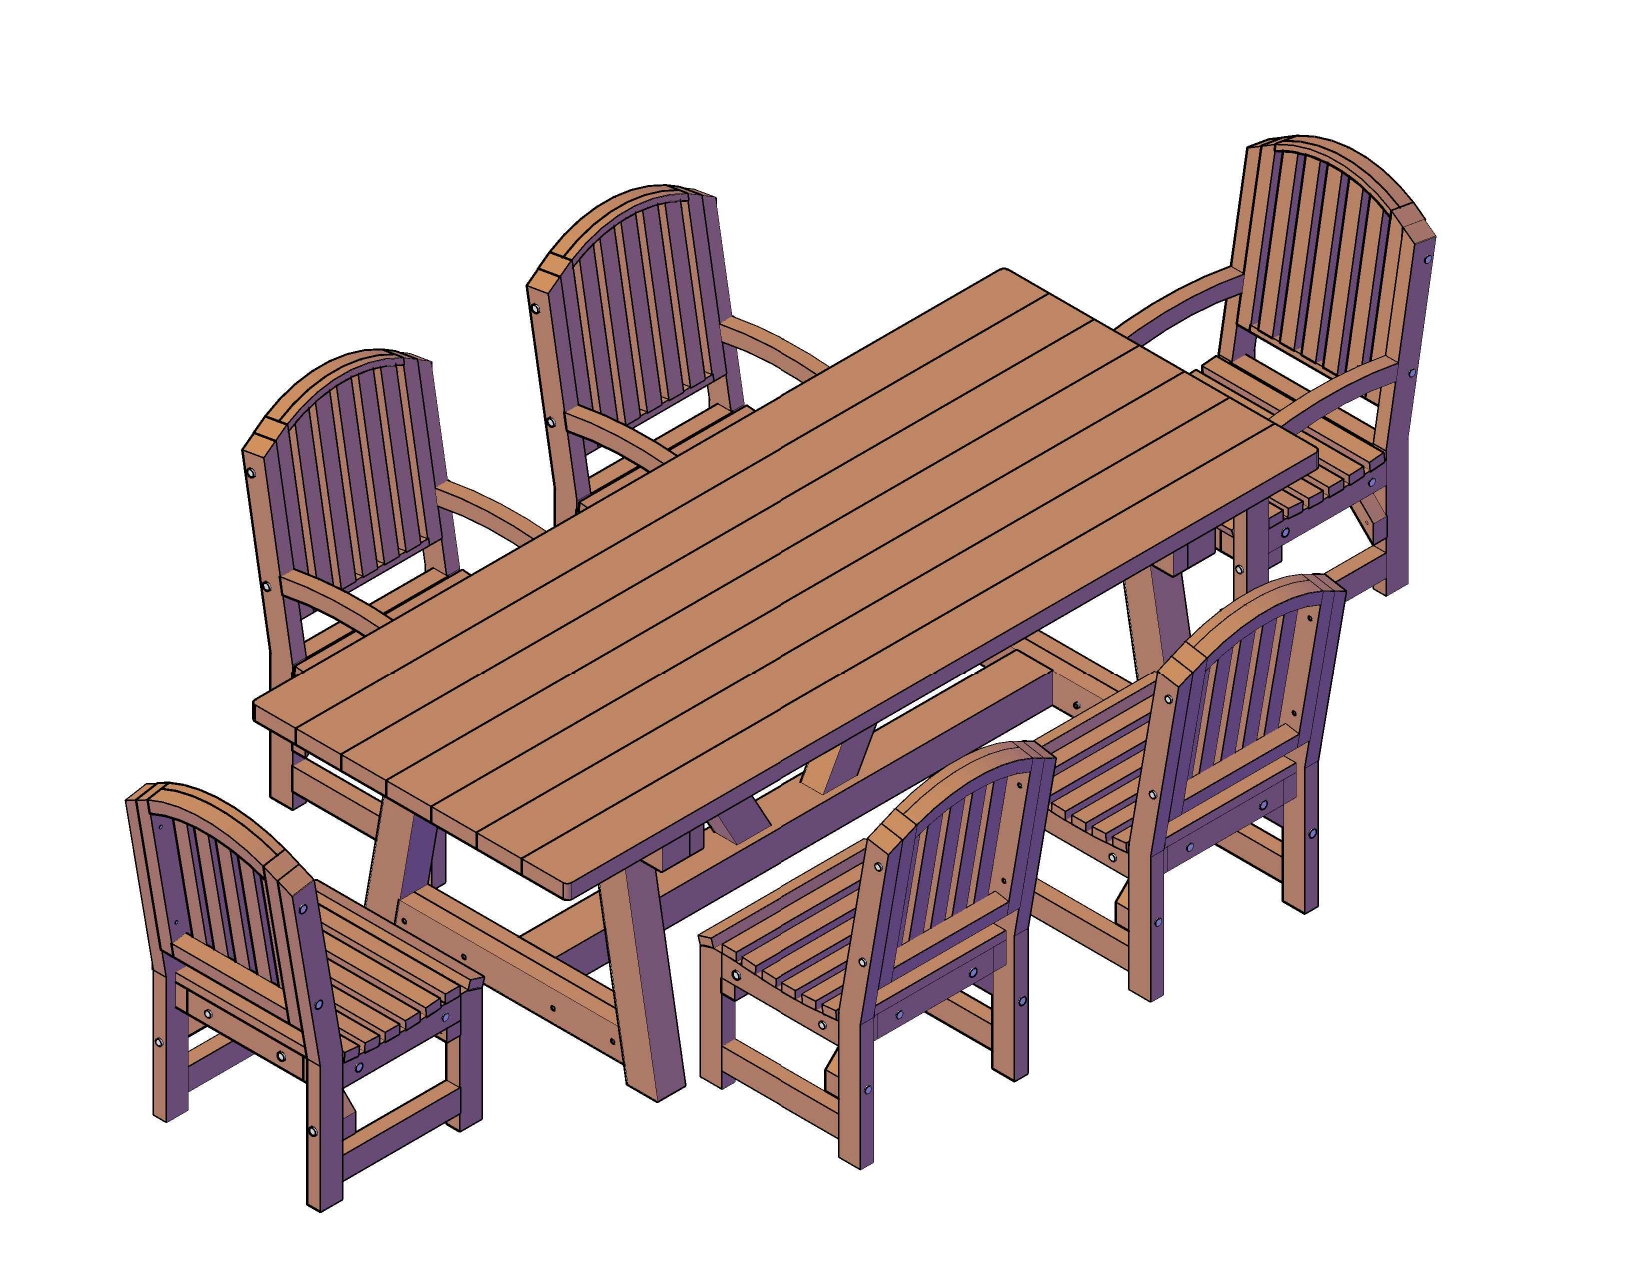 chairs_armless_armchairs_the_classic_redwood_patio_table_d_04.jpg